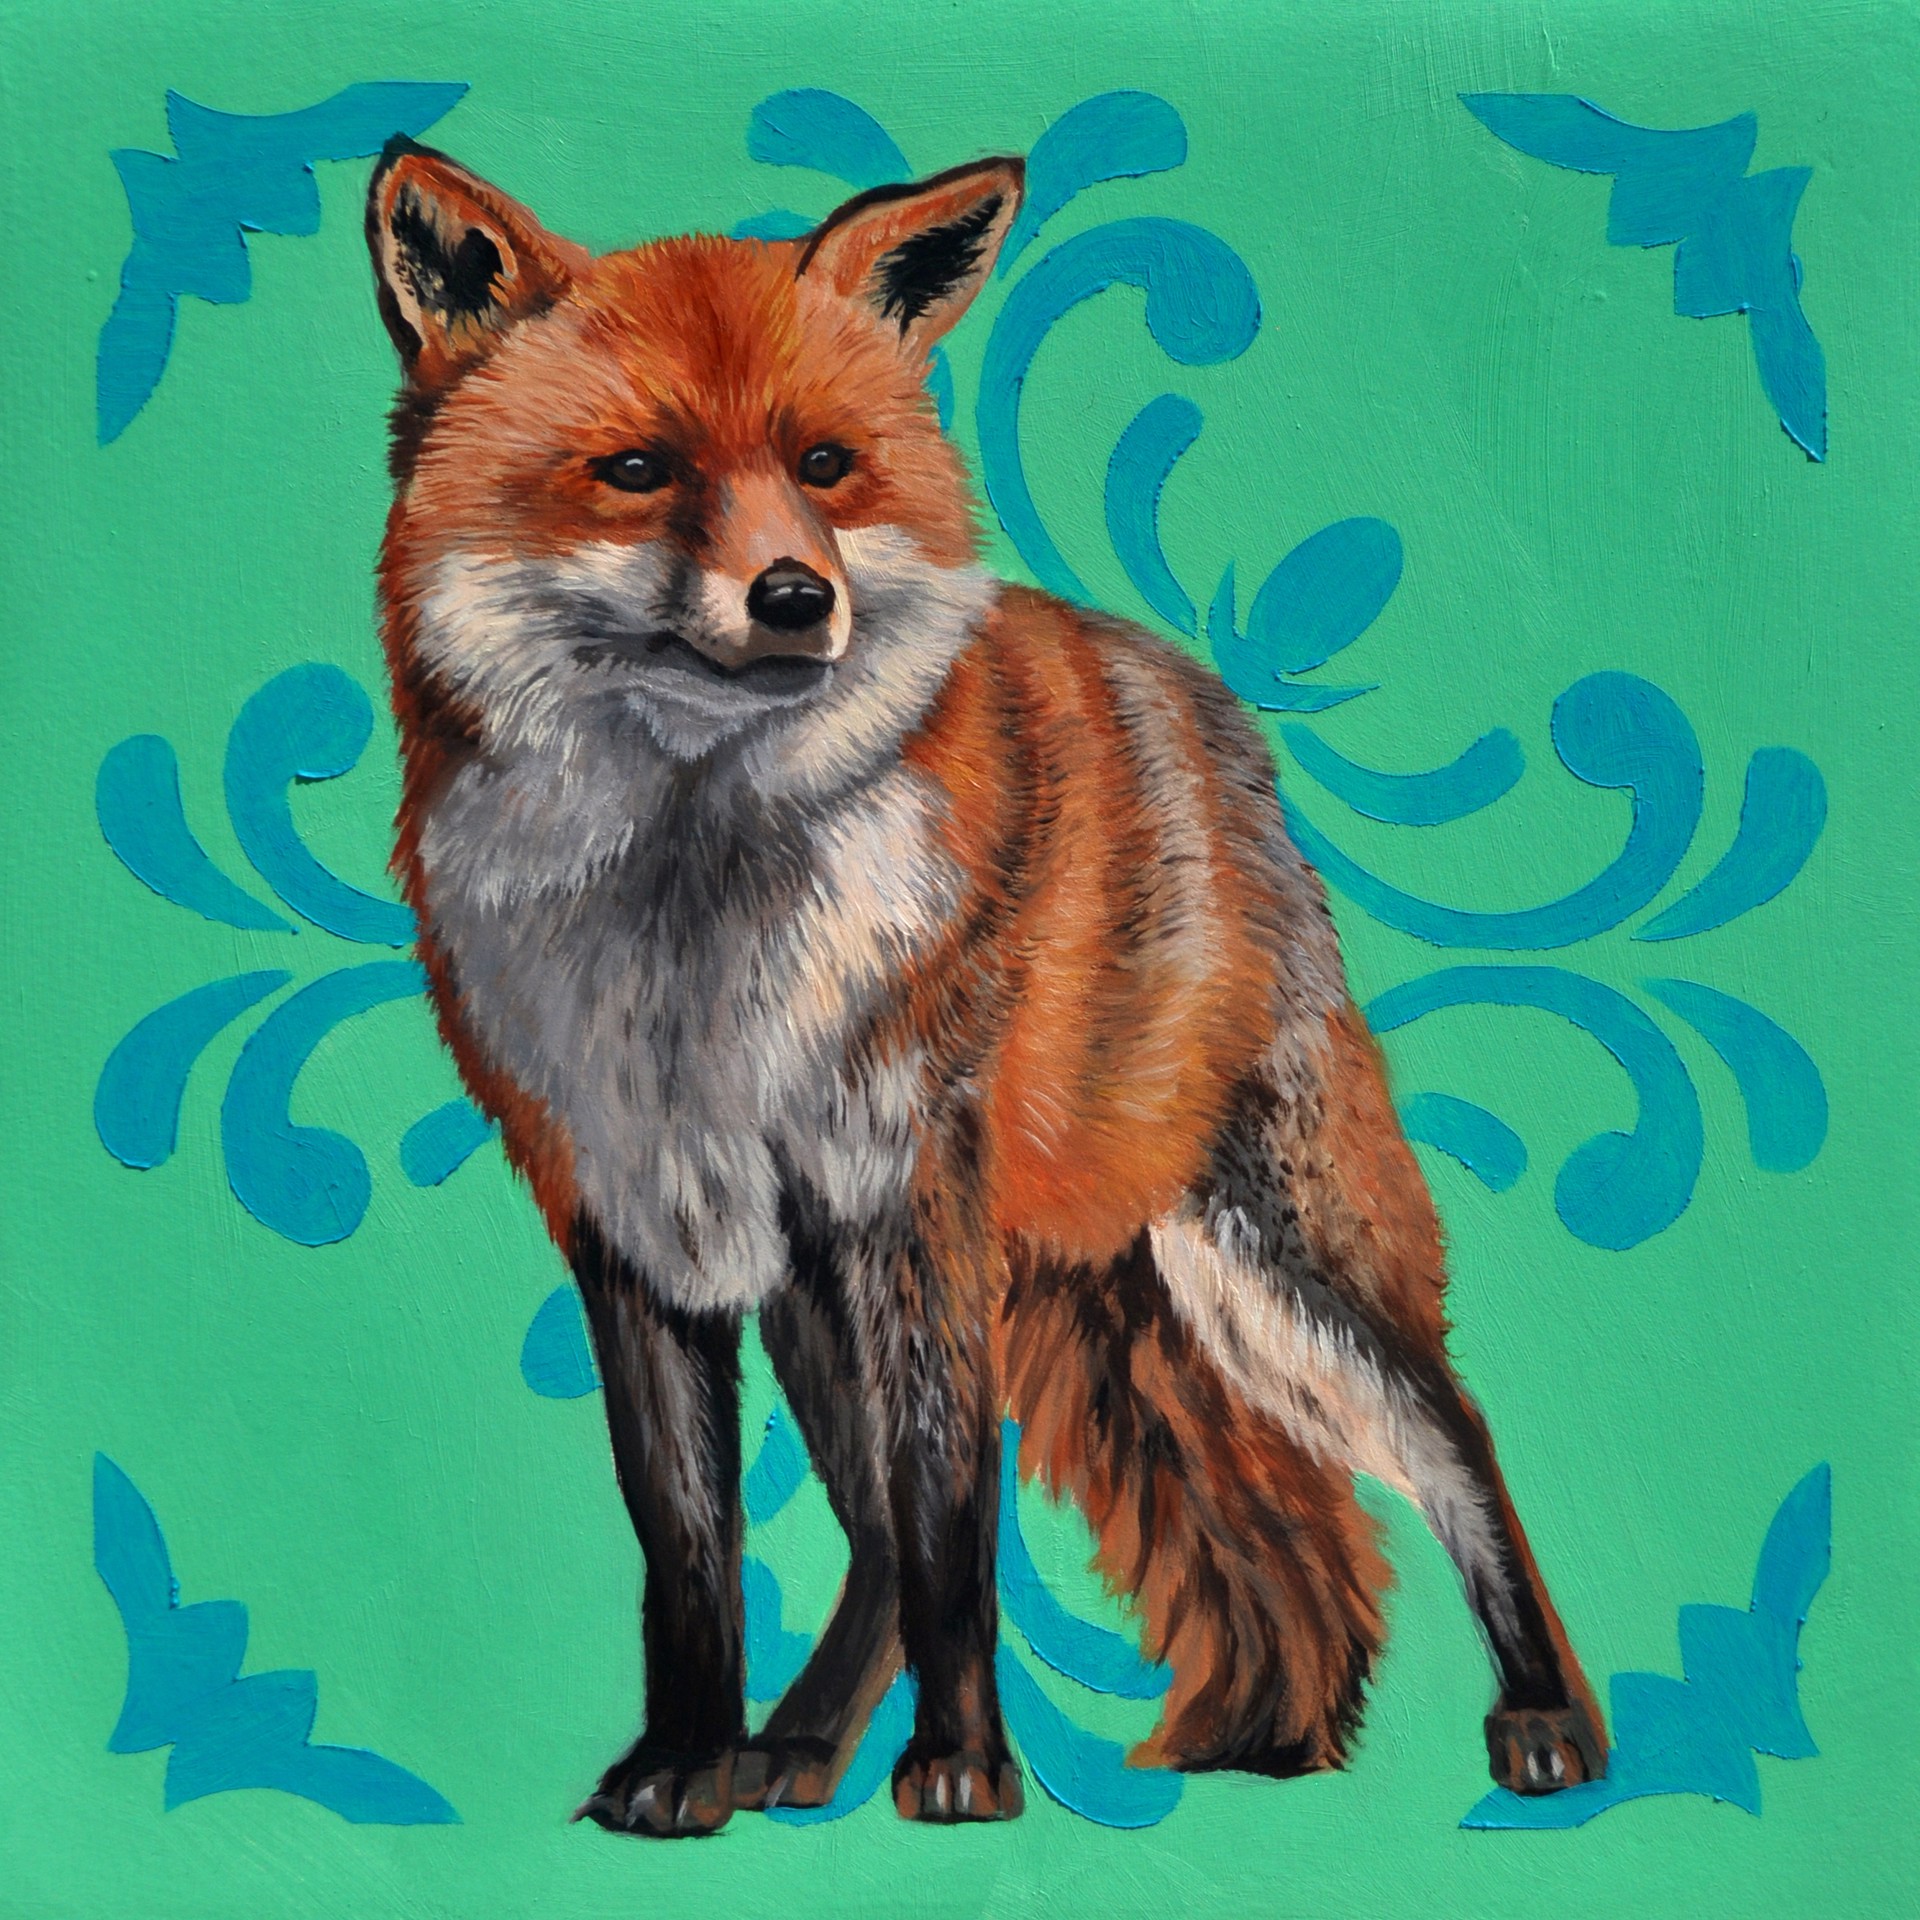 Fox on Green Background by Robin Hextrum